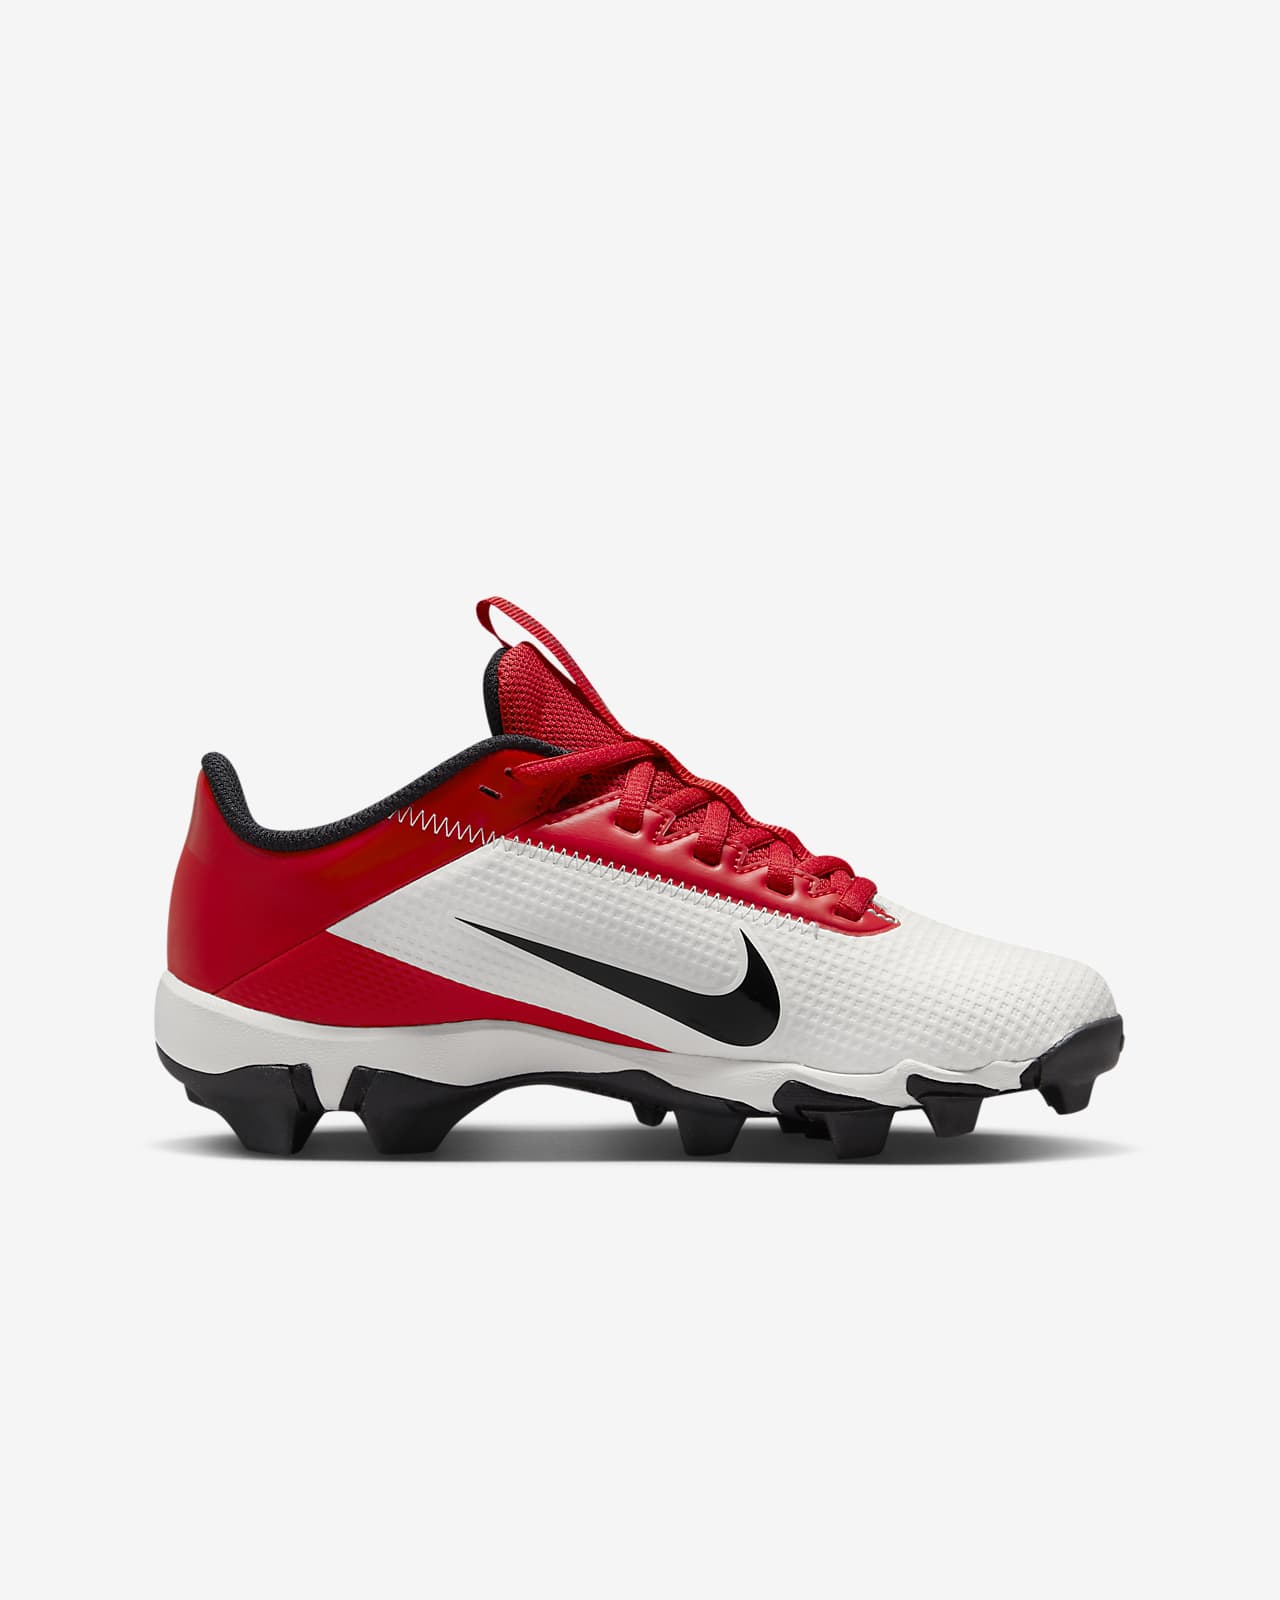 Nike Soccer Cleats & Shoes for Men, Women and Kids